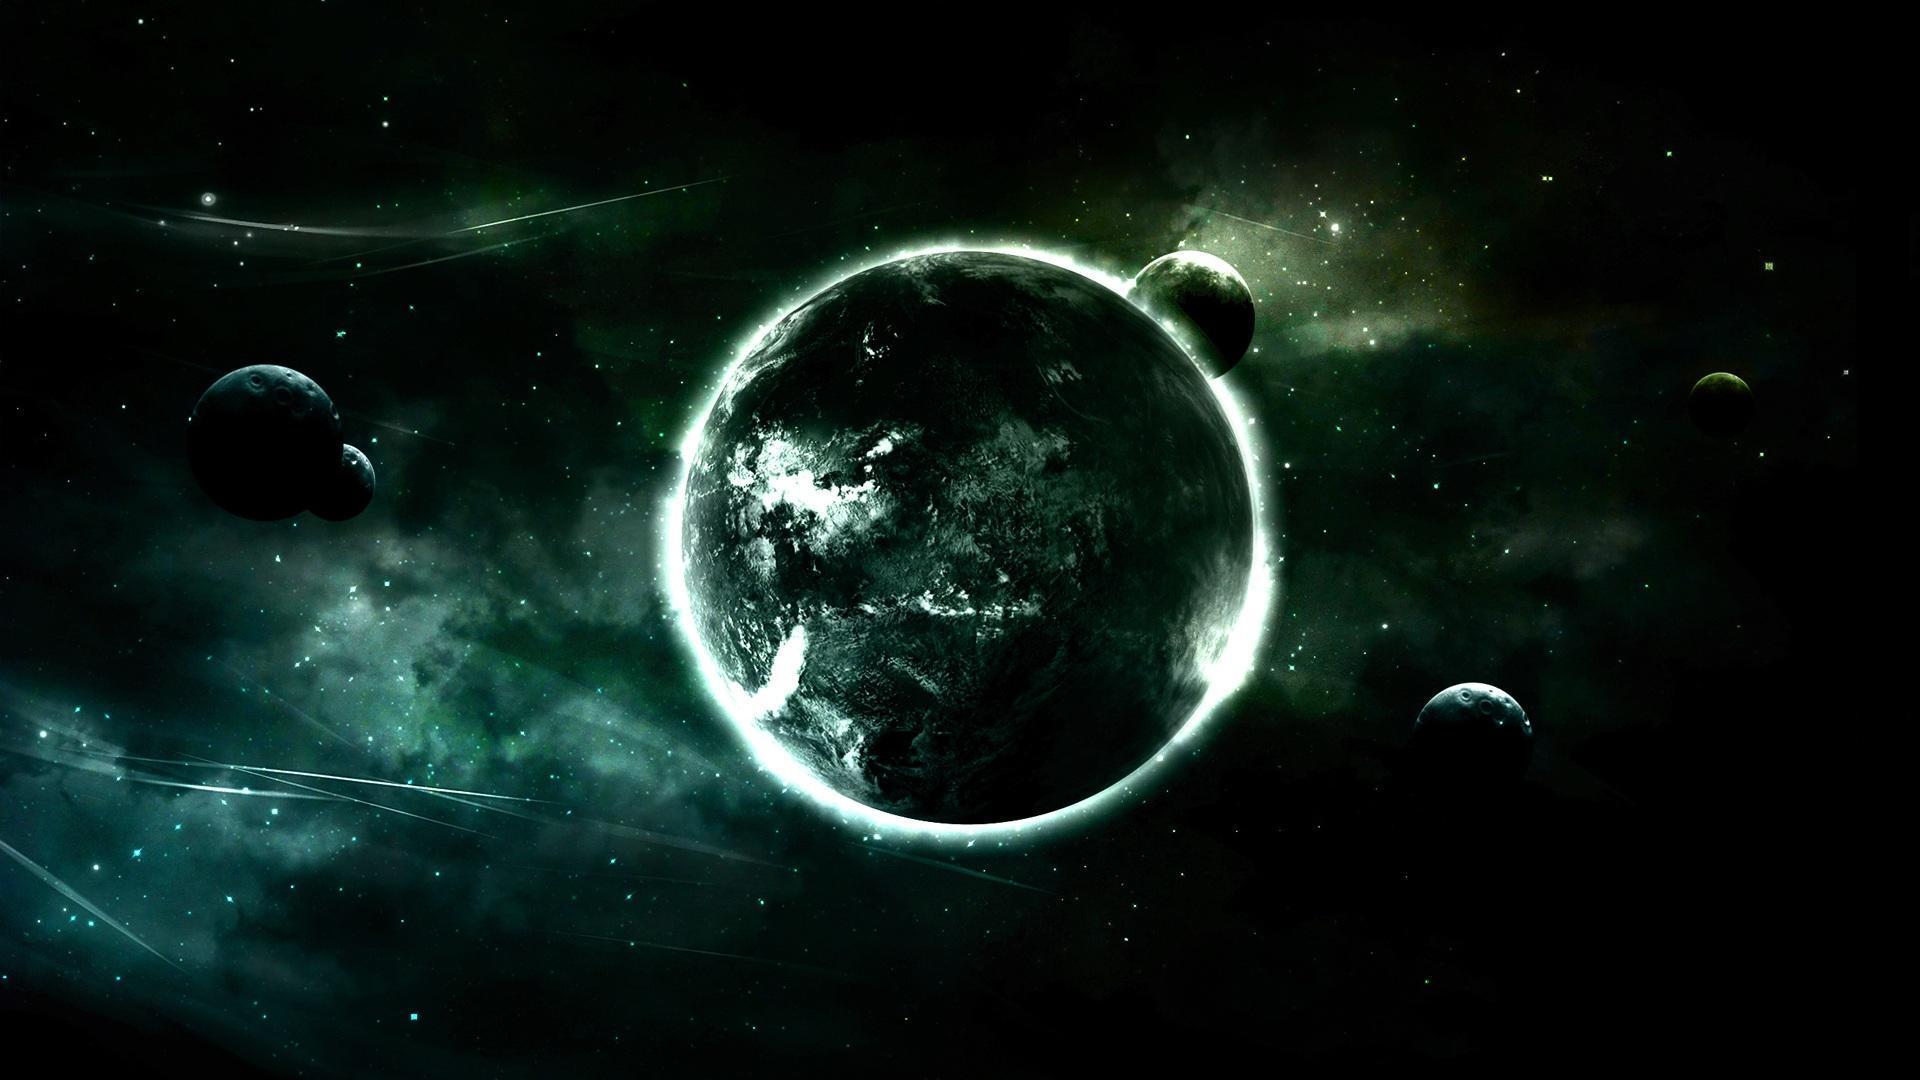 green outer space planets tone Wallpaper 1920x1080. Hot HD Wallpaper